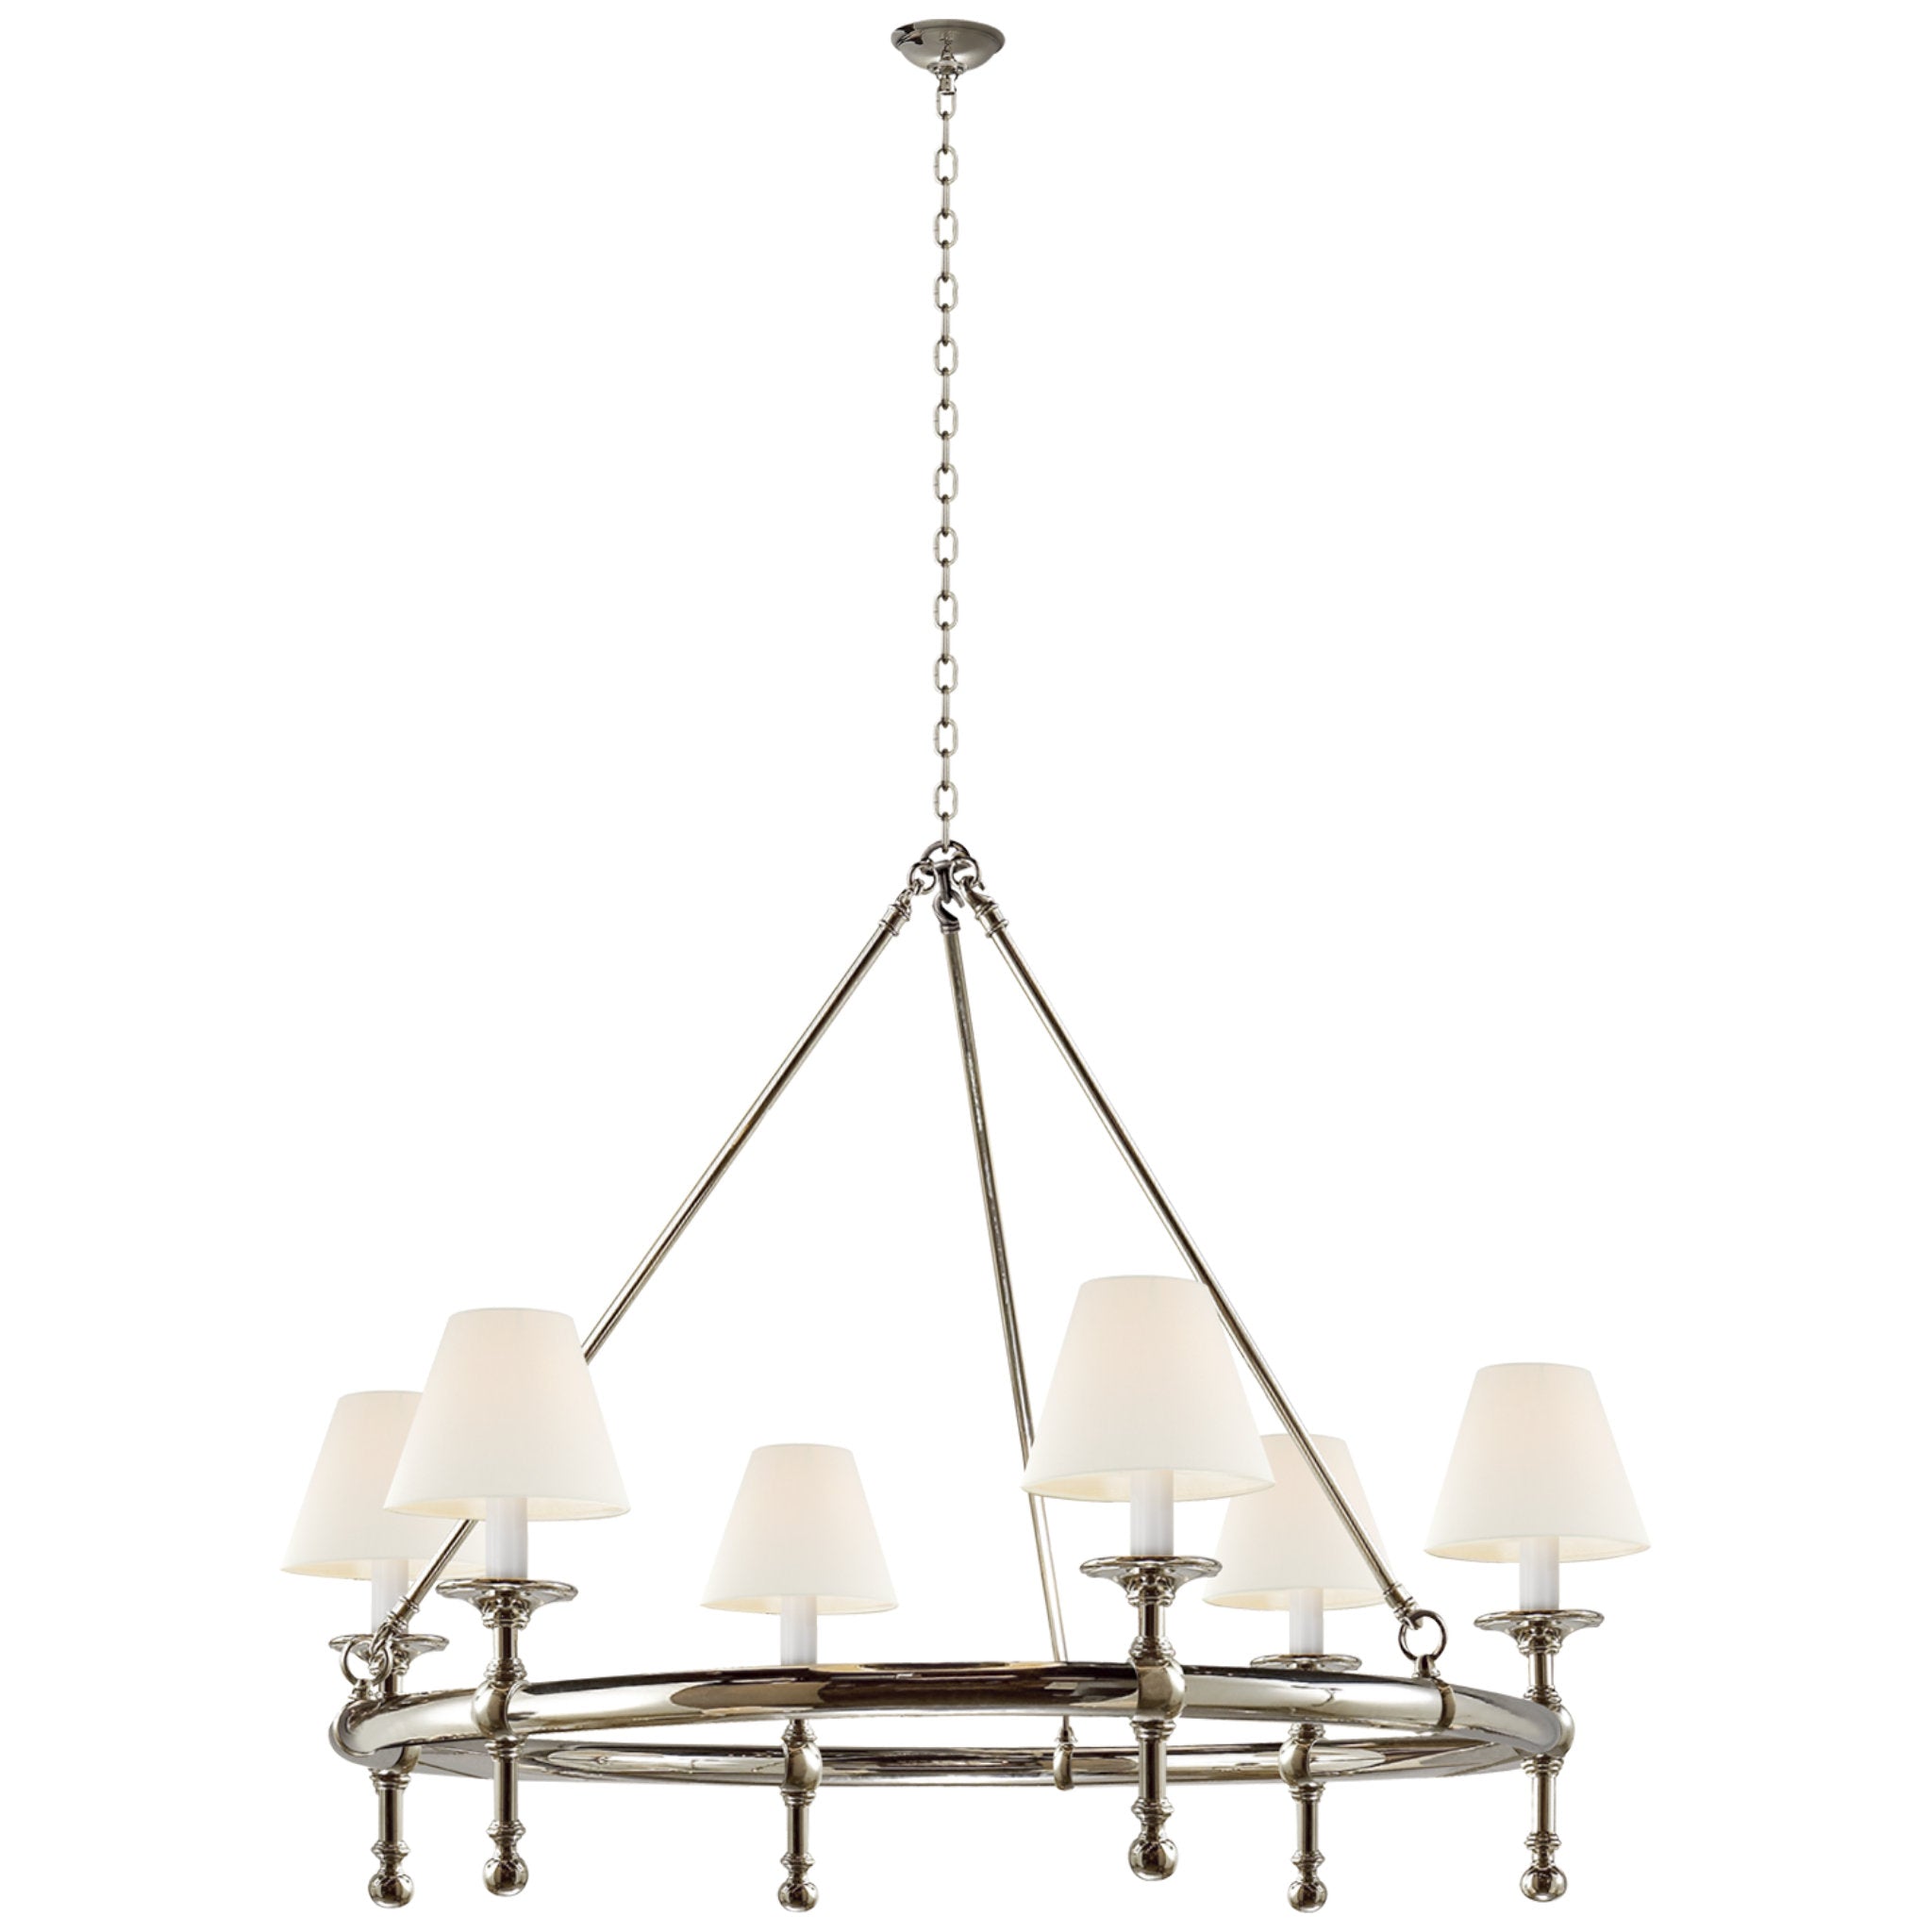 Chapman & Myers Classic Ring Chandelier in Polished Nickel with Linen Shades